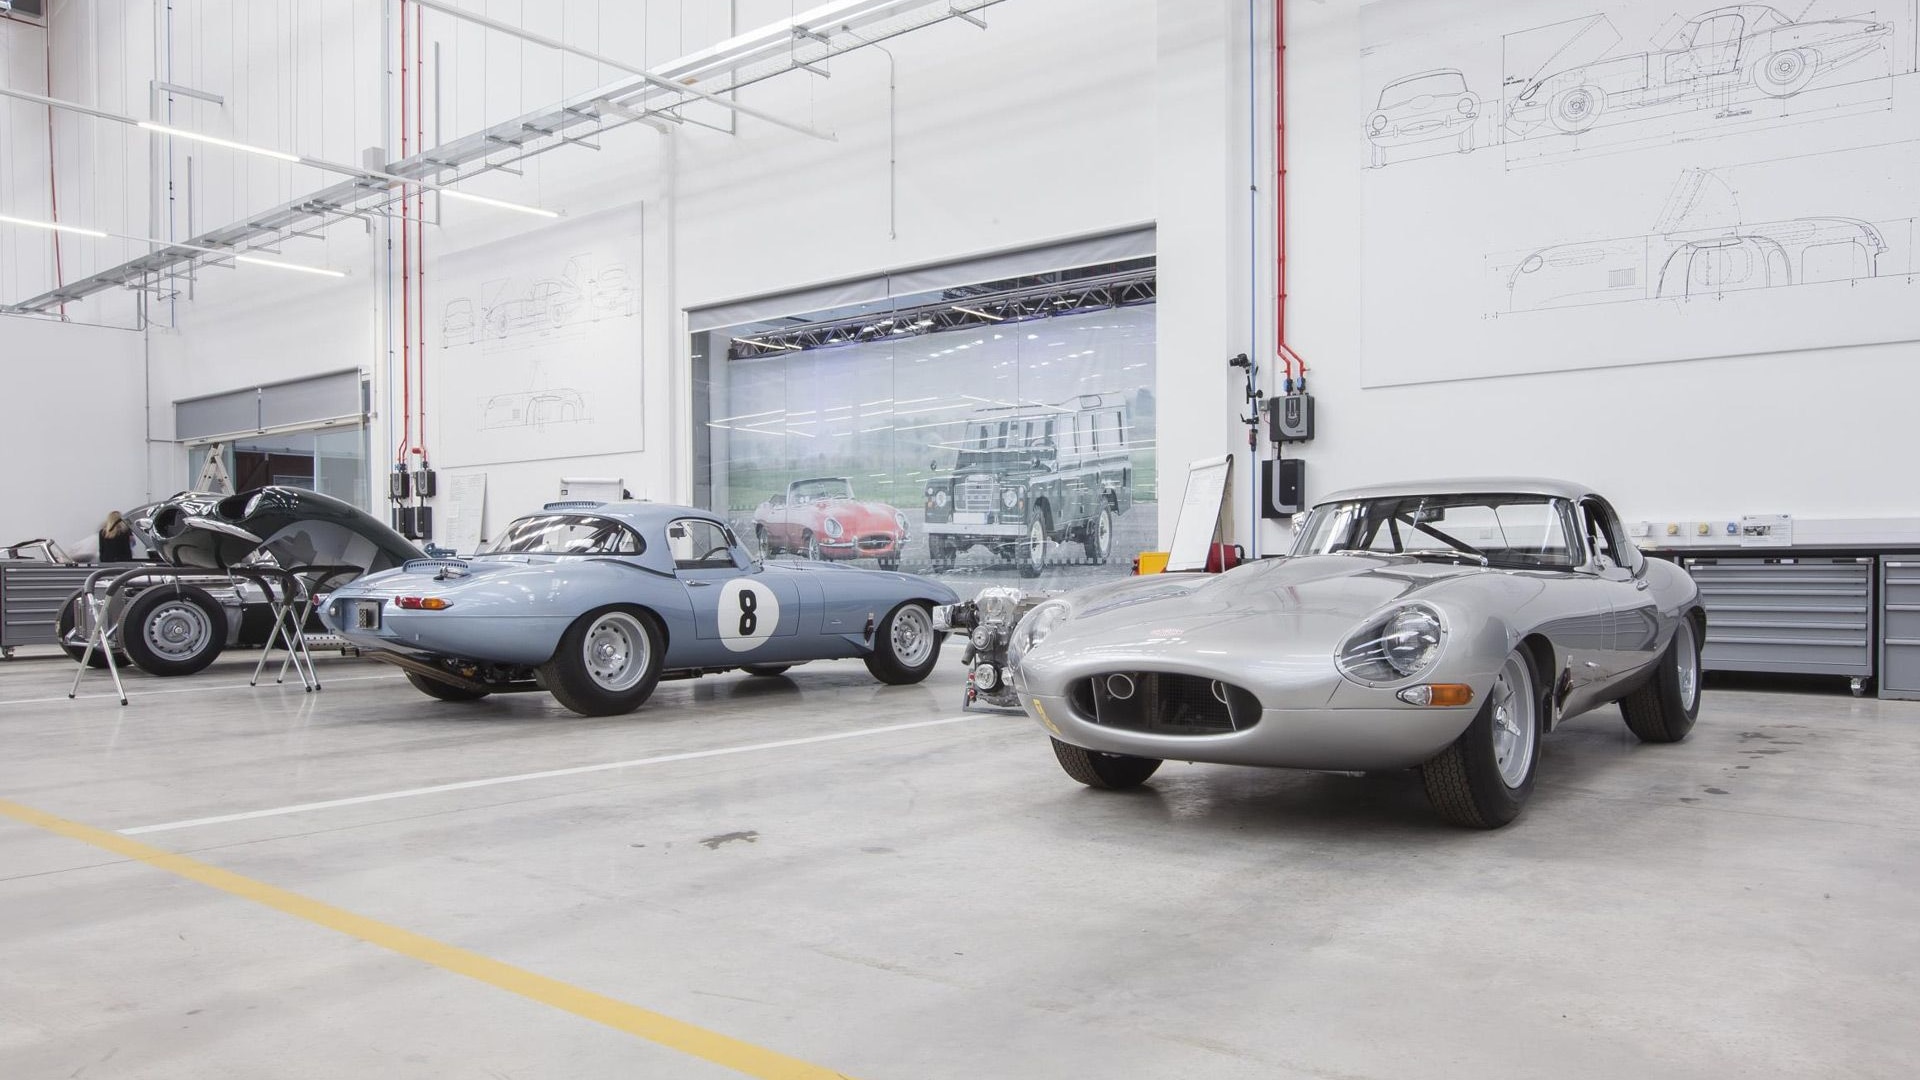 Jaguar Land Rover Classic Works in Coventry, United Kingdom